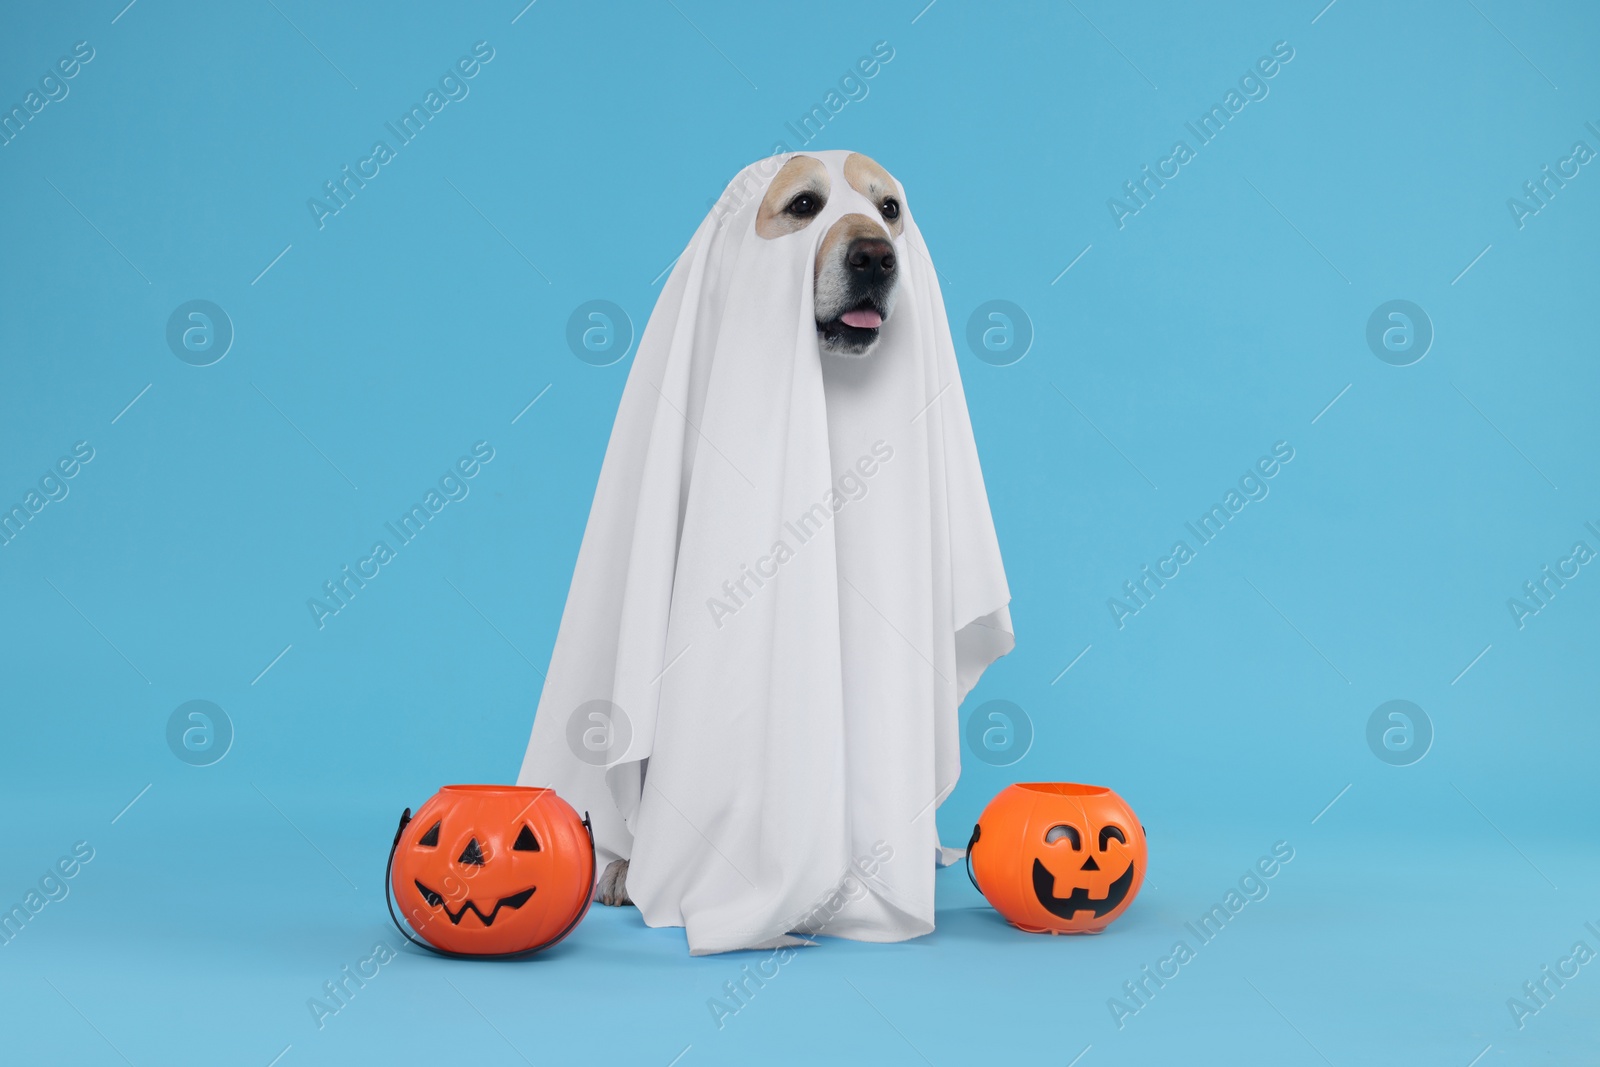 Photo of Cute Labrador Retriever dog wearing ghost costume with Halloween buckets on light blue background